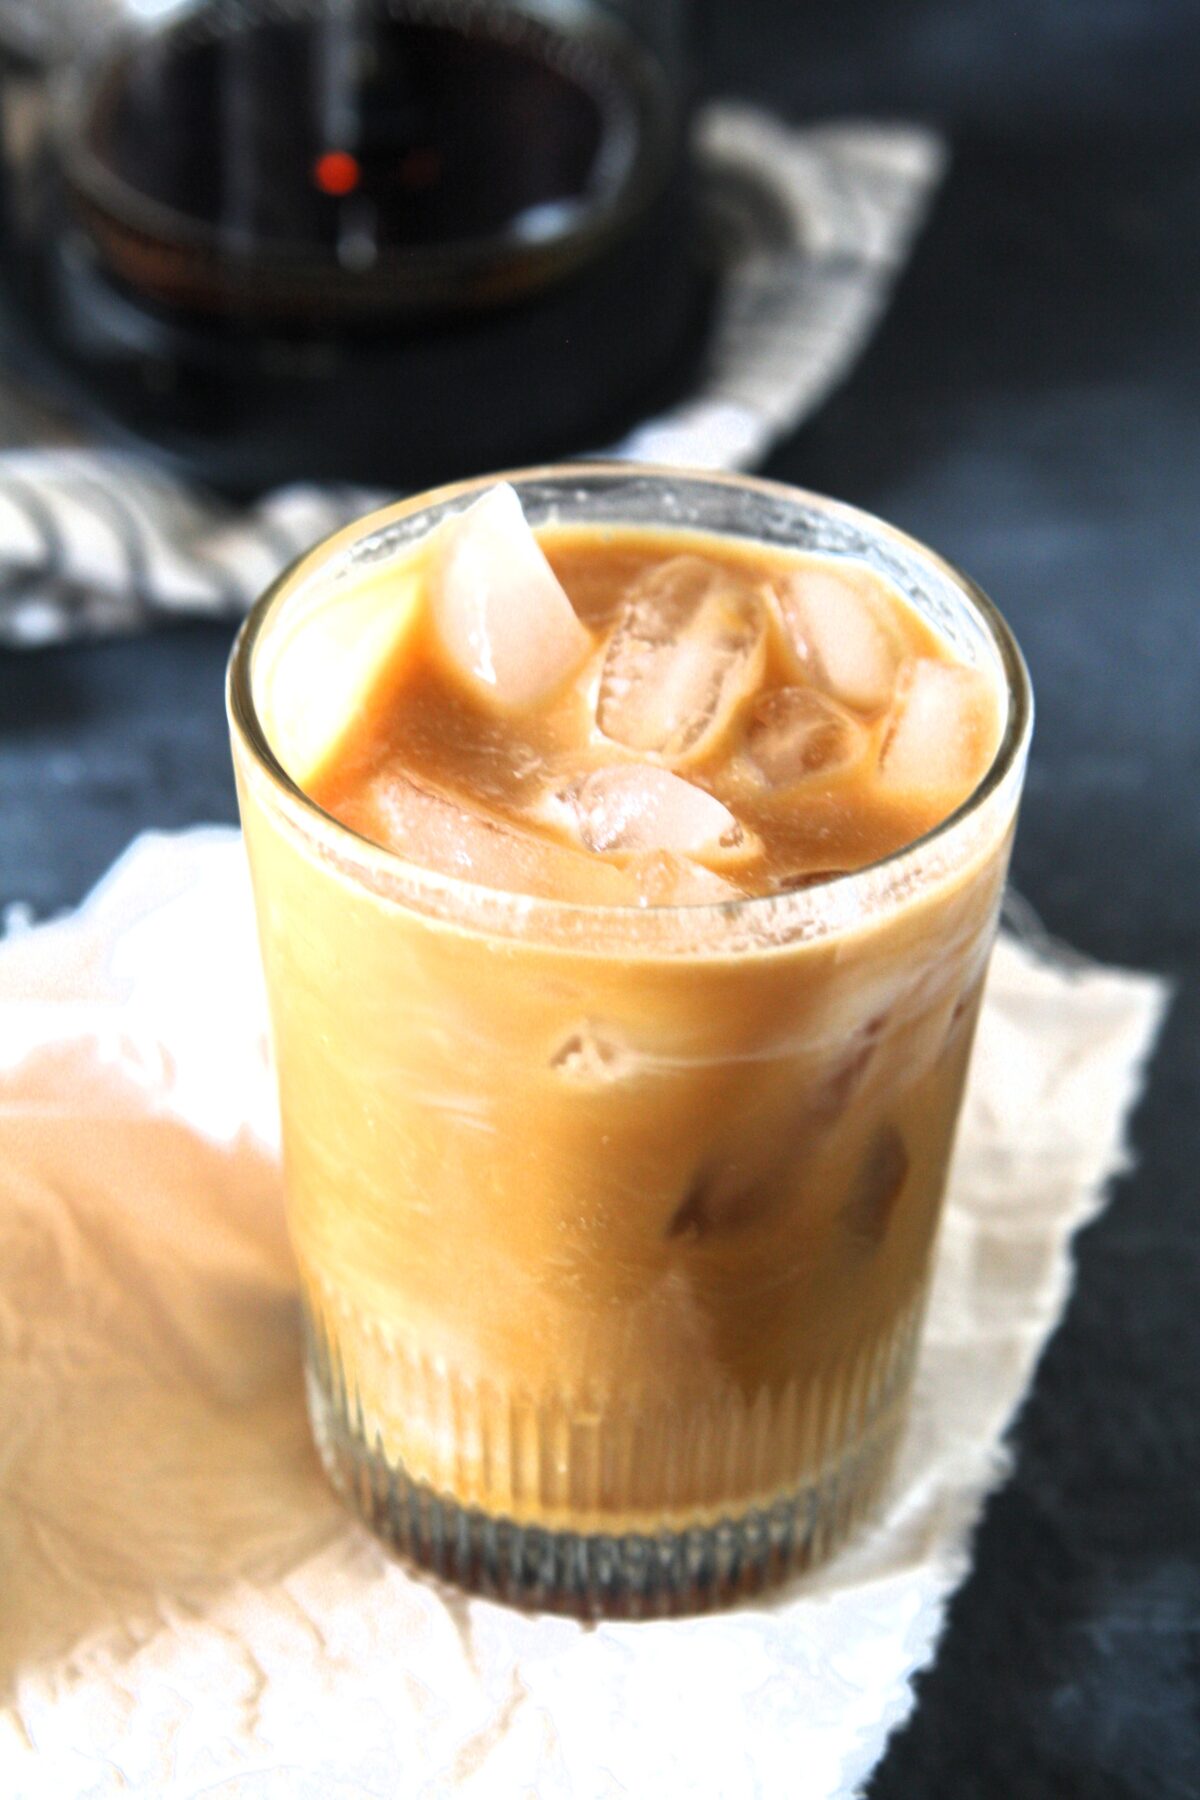 Iced coffee has become a popular beverage in the modern coffee culture among coffee lovers. But is it bad for your health if you drink iced coffee everyday?